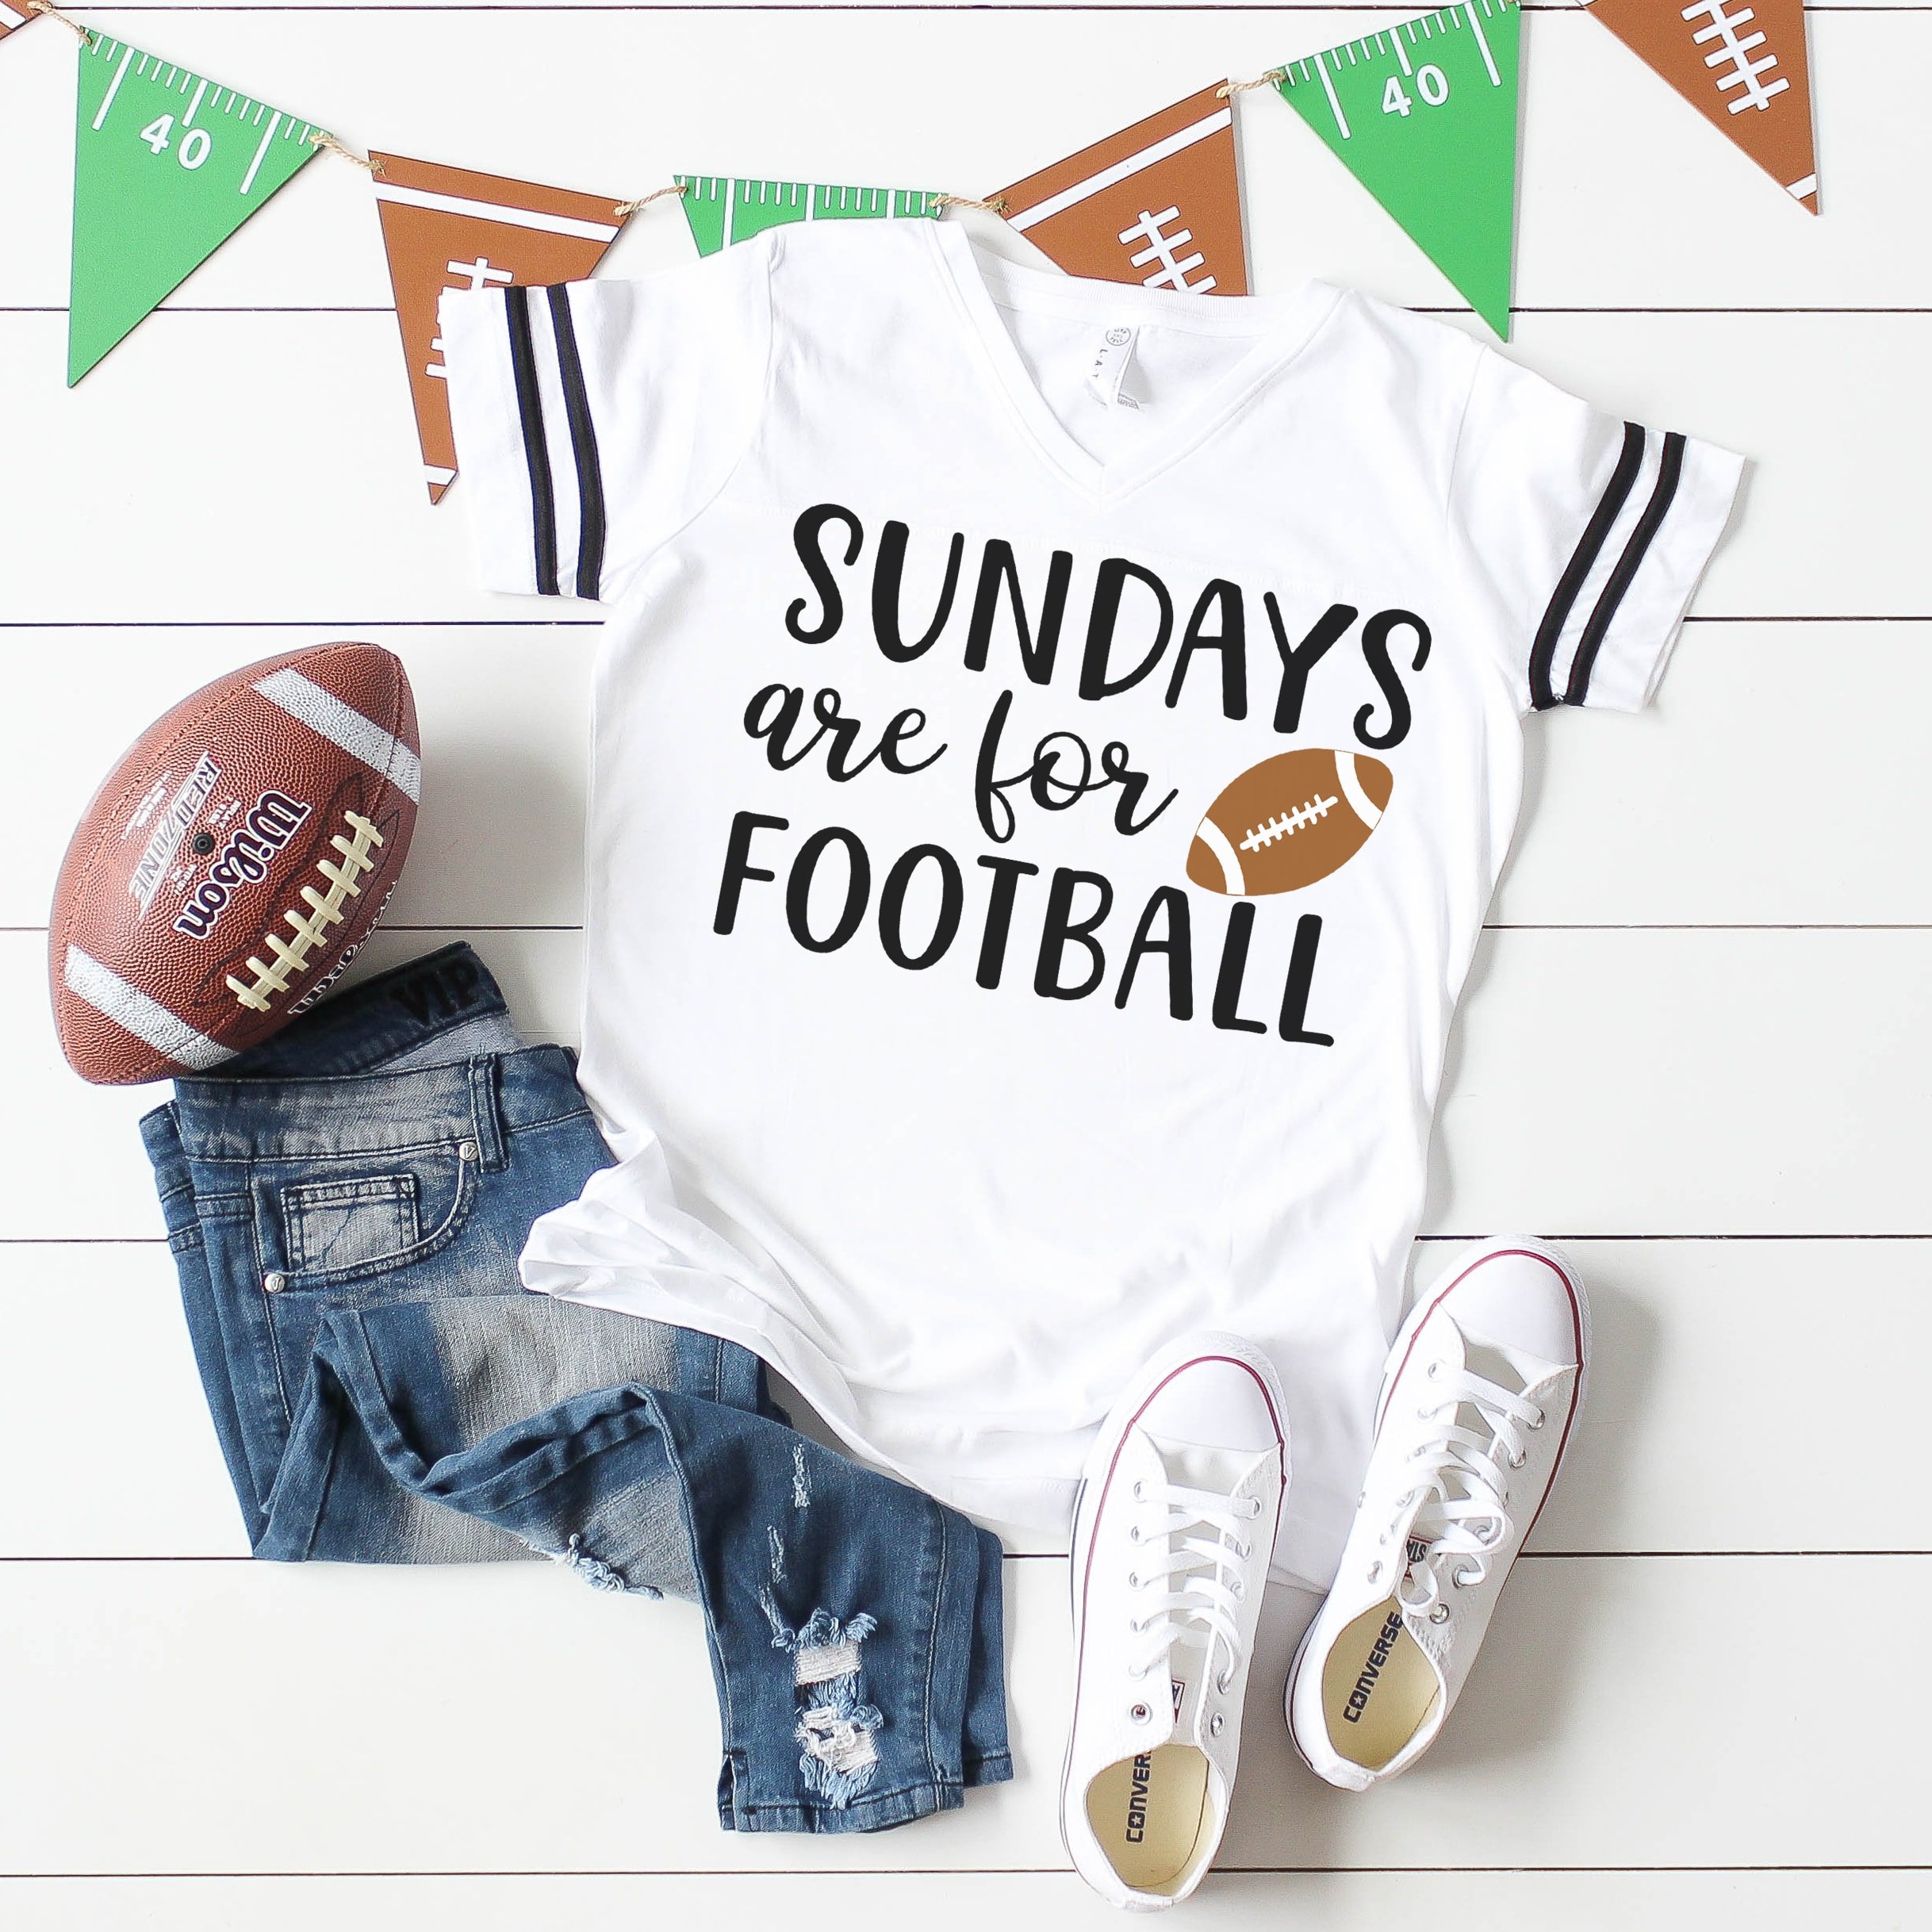 "Sundays are for Football" Shirt on white wood background with football, jeans, white shoes, and football banner